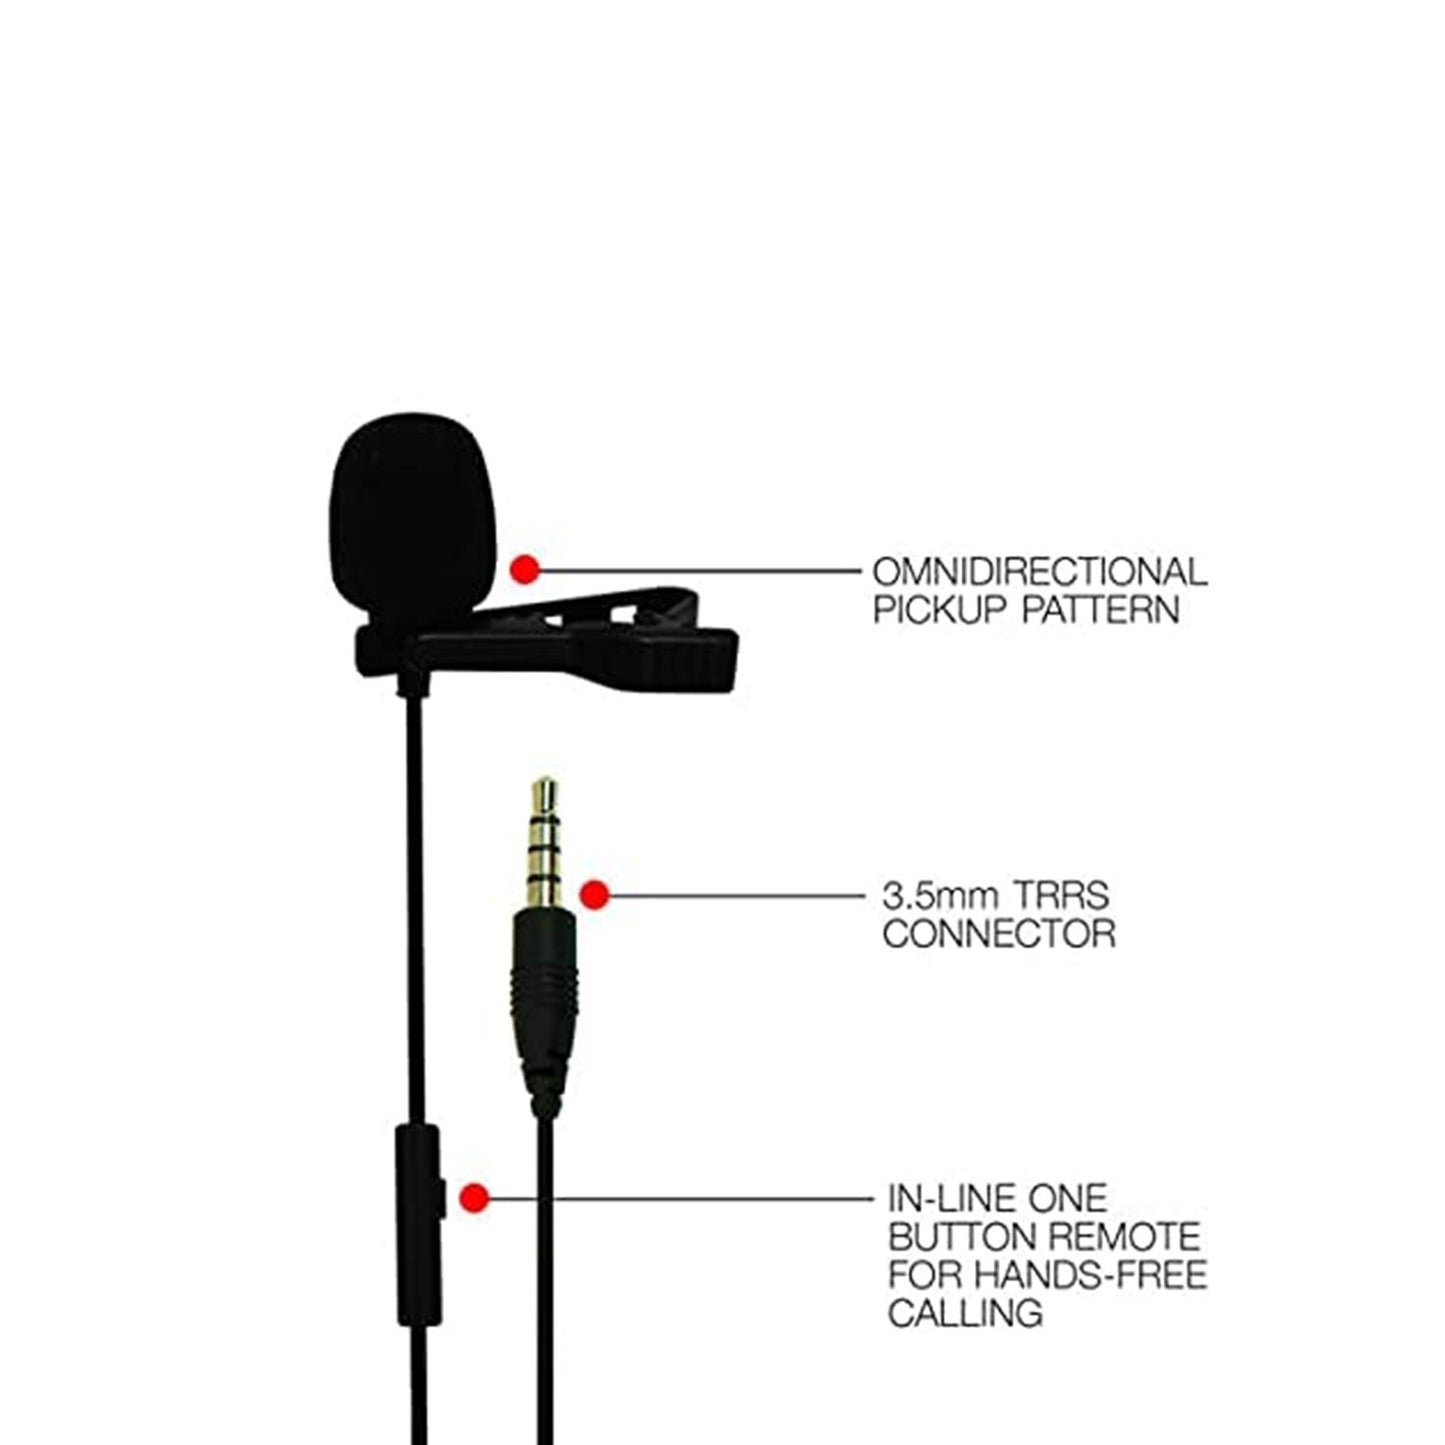 JBL Commercial CSLM30 Auxiliary Omnidirectional Lavalier Microphone with Earphone for Calls, Conferences and Monitoring